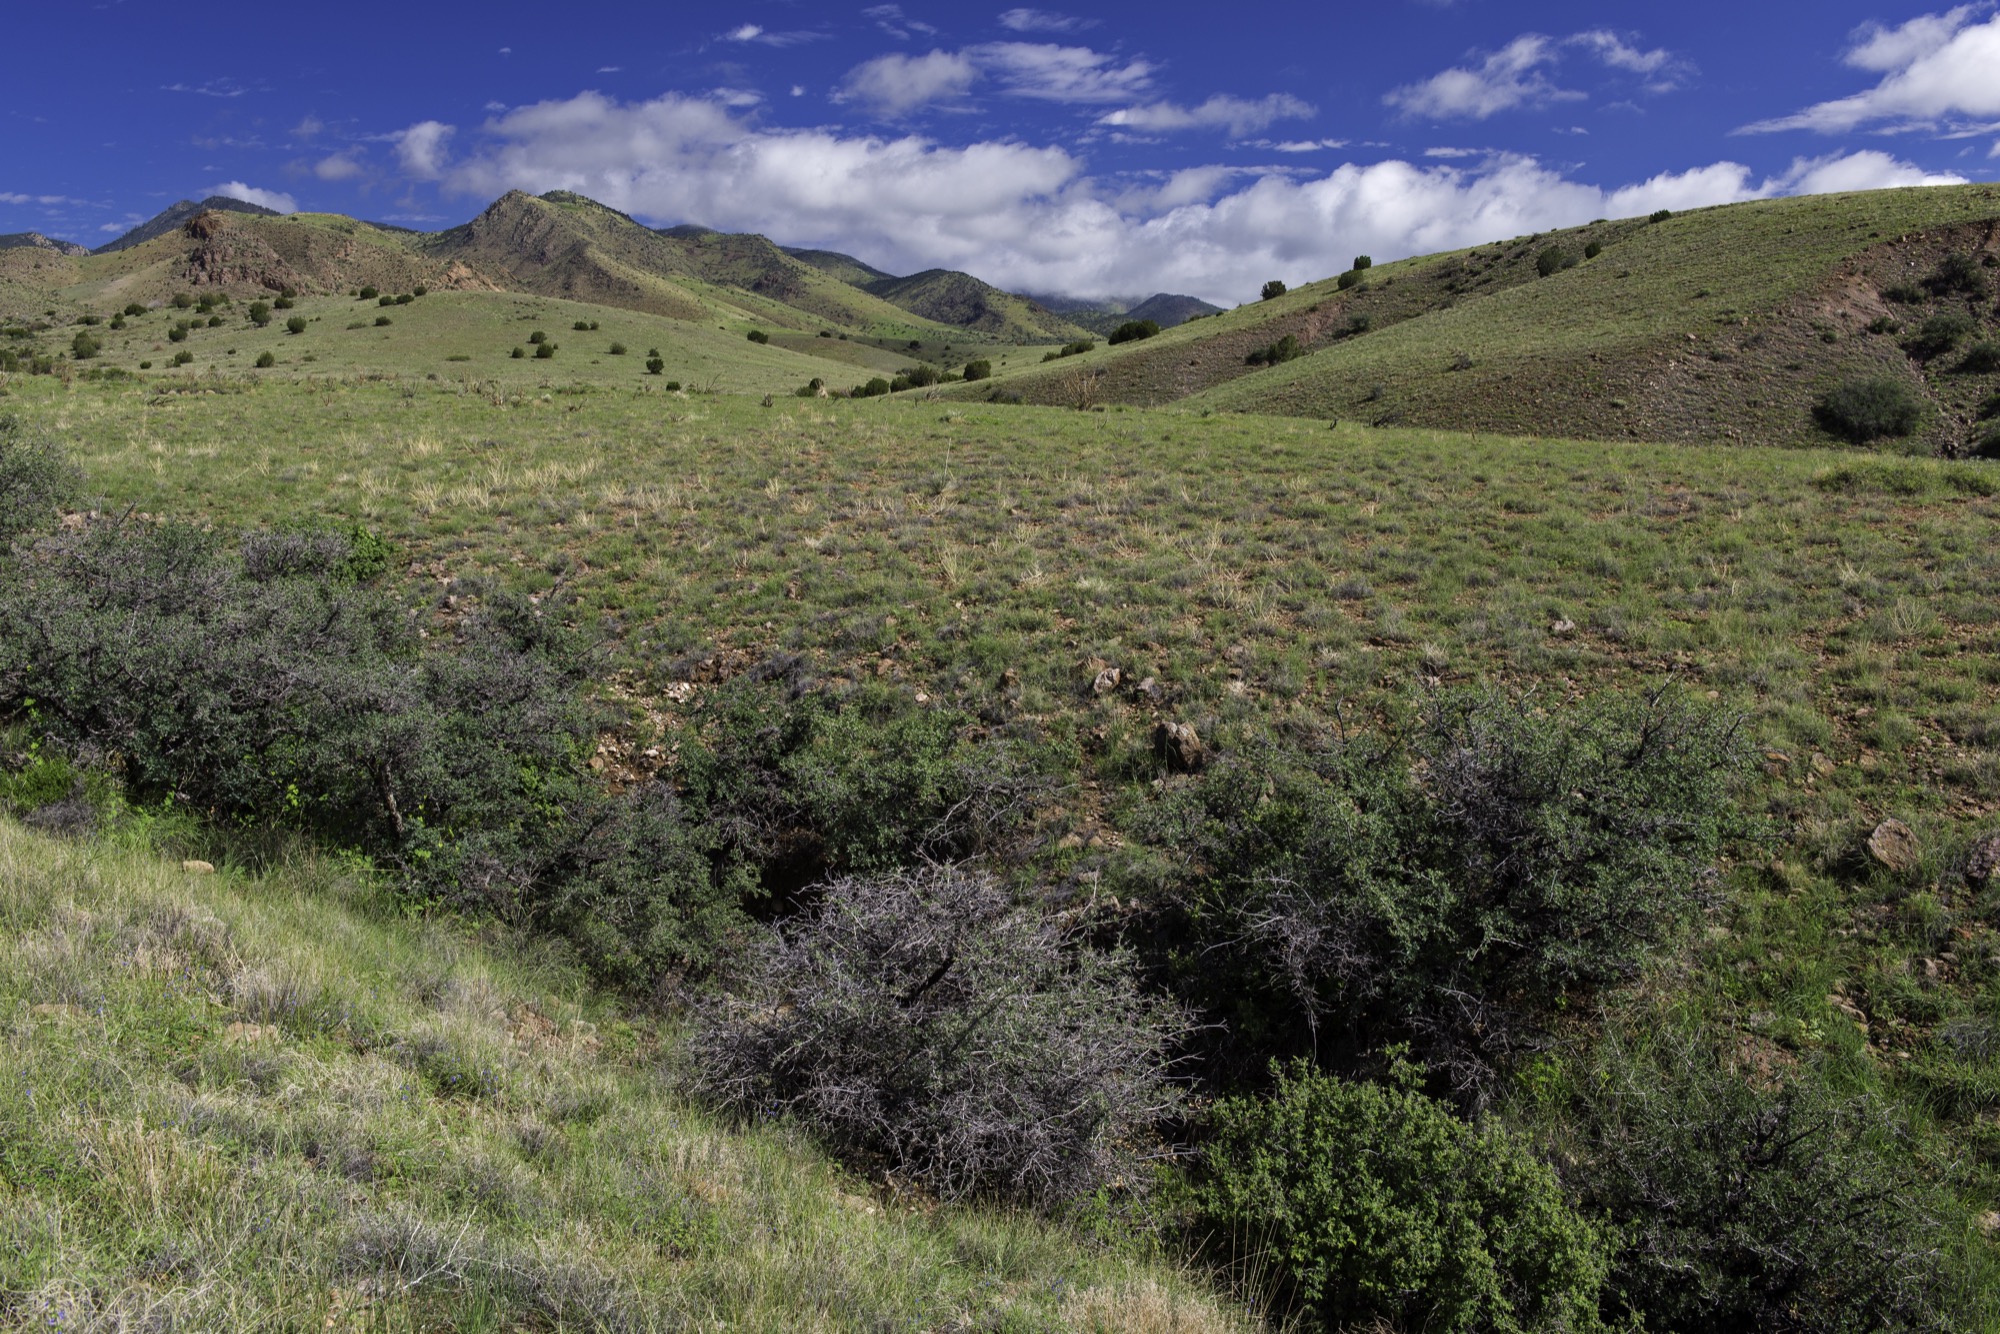 A hilly portion of the ranch